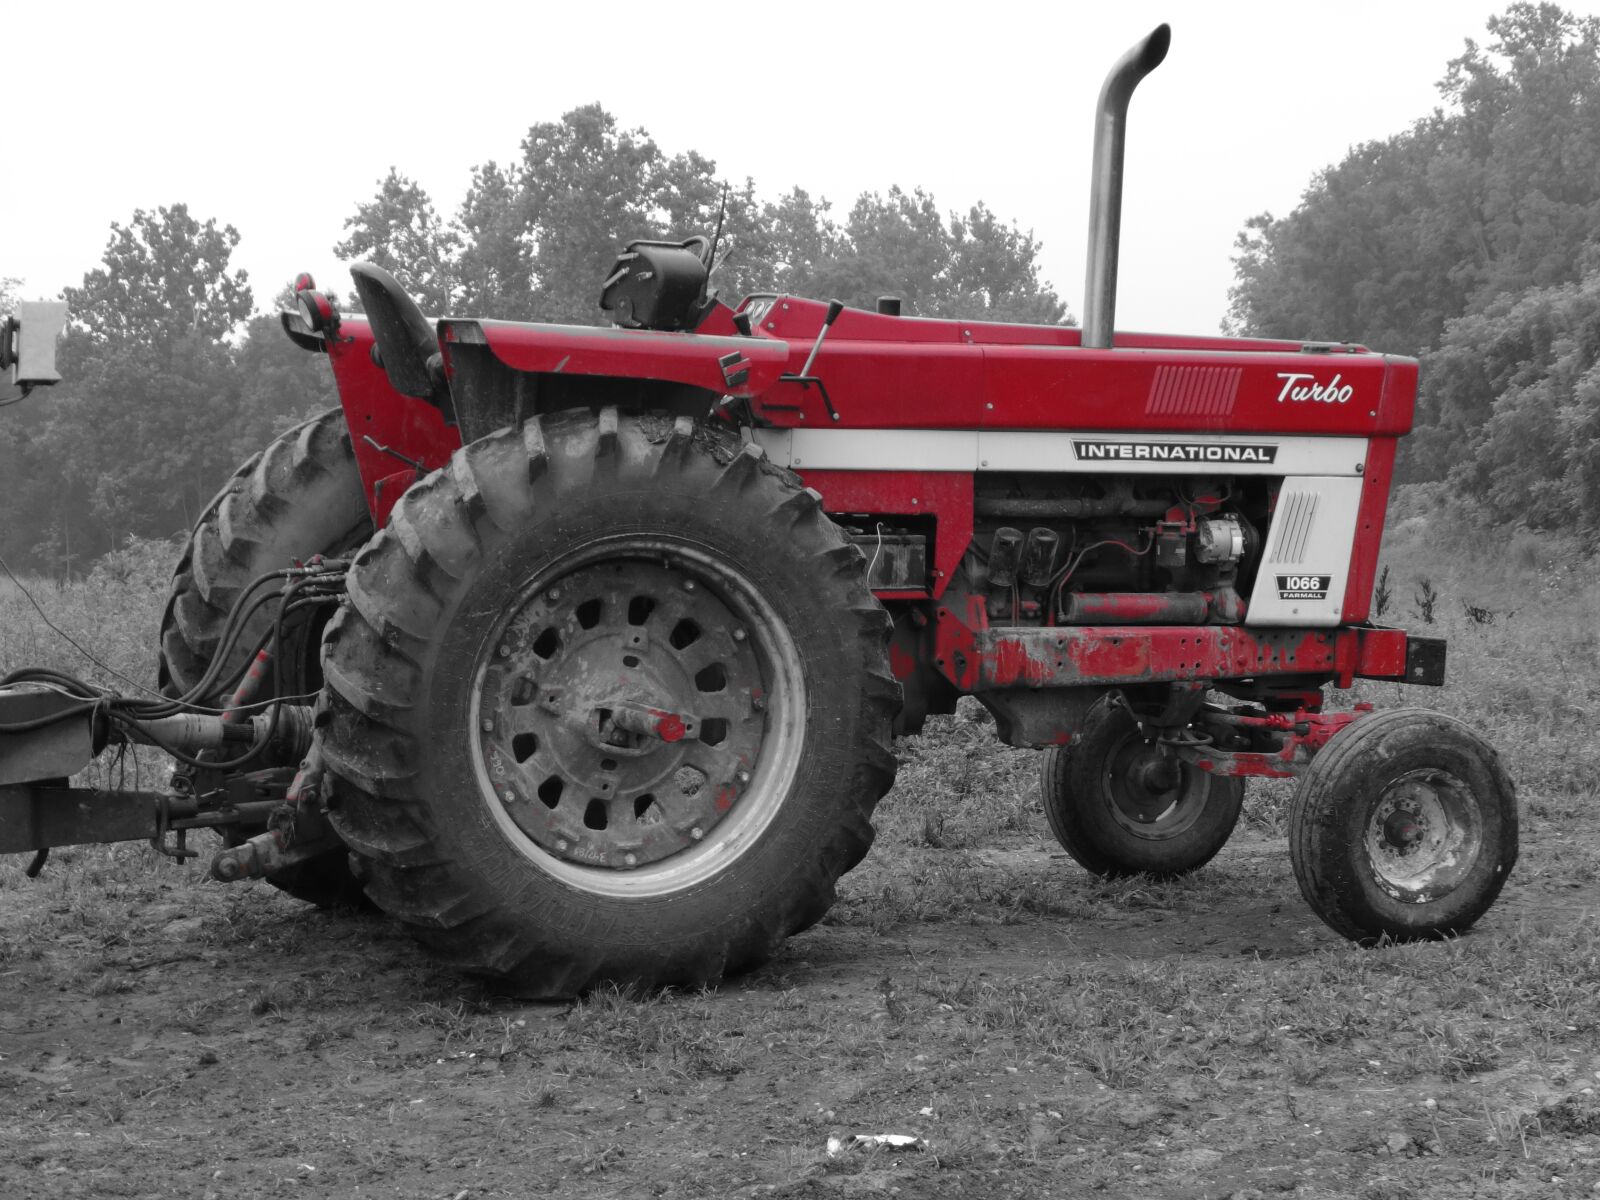 Sony Cyber-shot DSC-WX80 sample photo. Tractor, red, farm photography